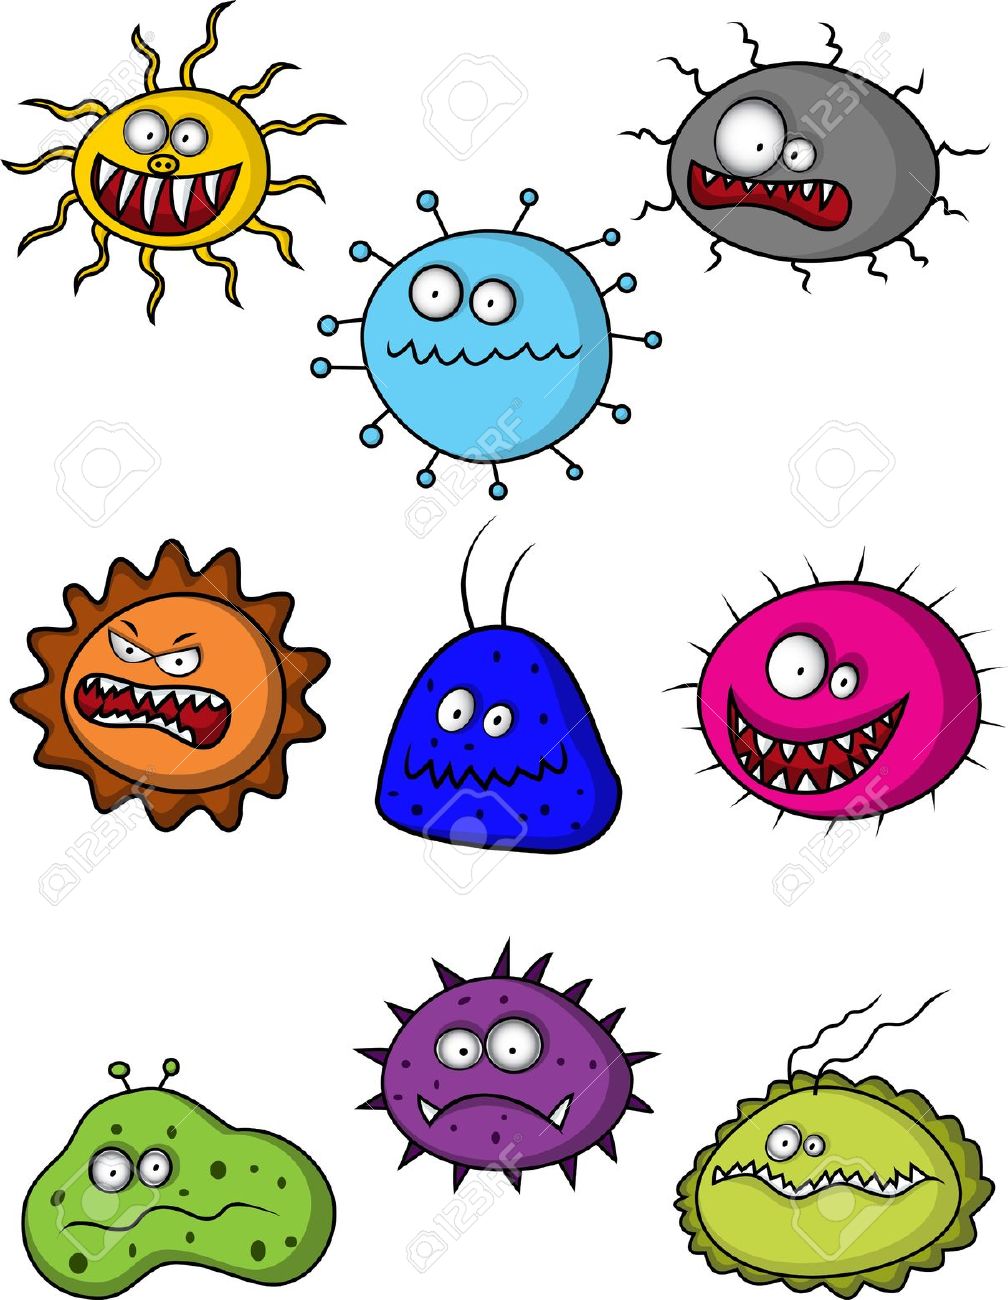 Bacteria clipart animated. Germs 